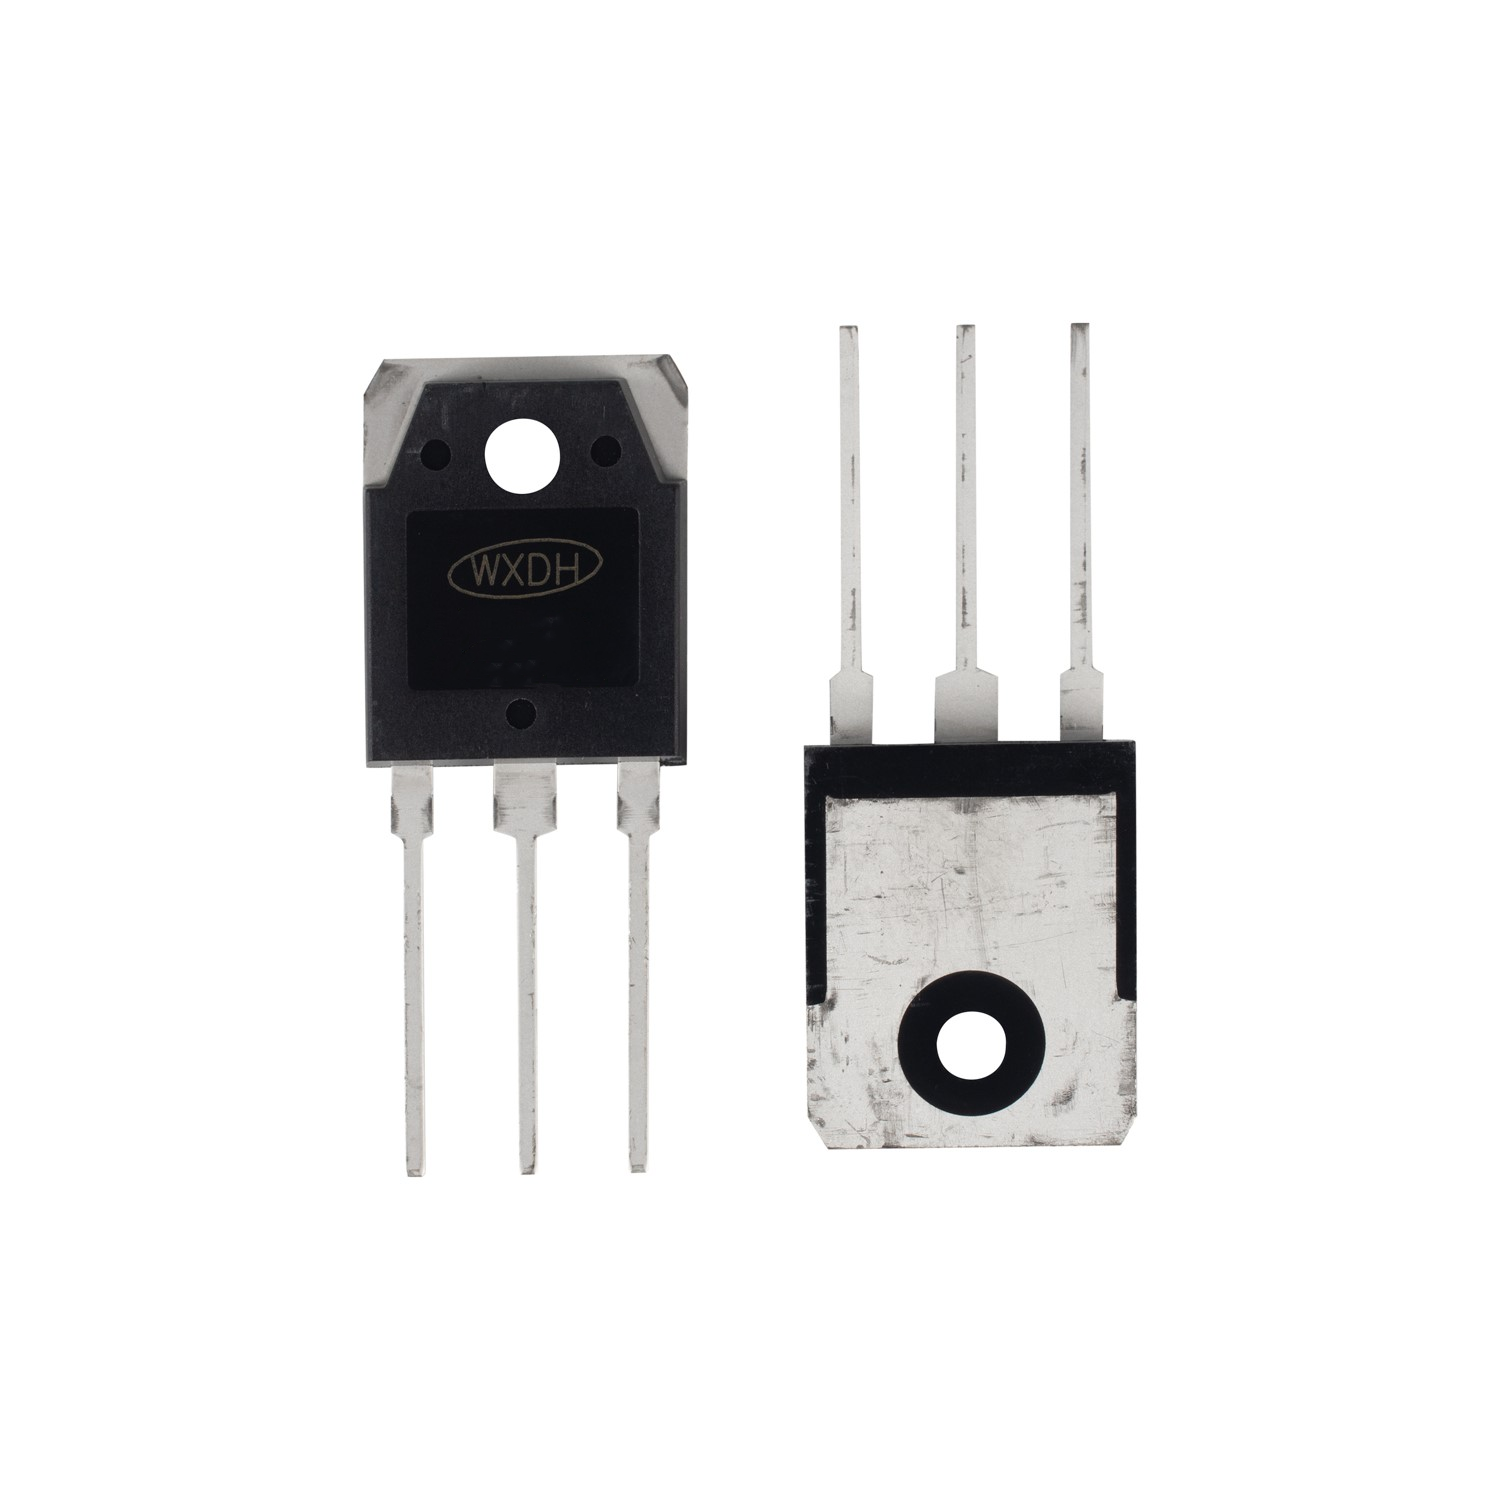 30A 600V Fast recovery diode MUR3060NCT TO-3PN